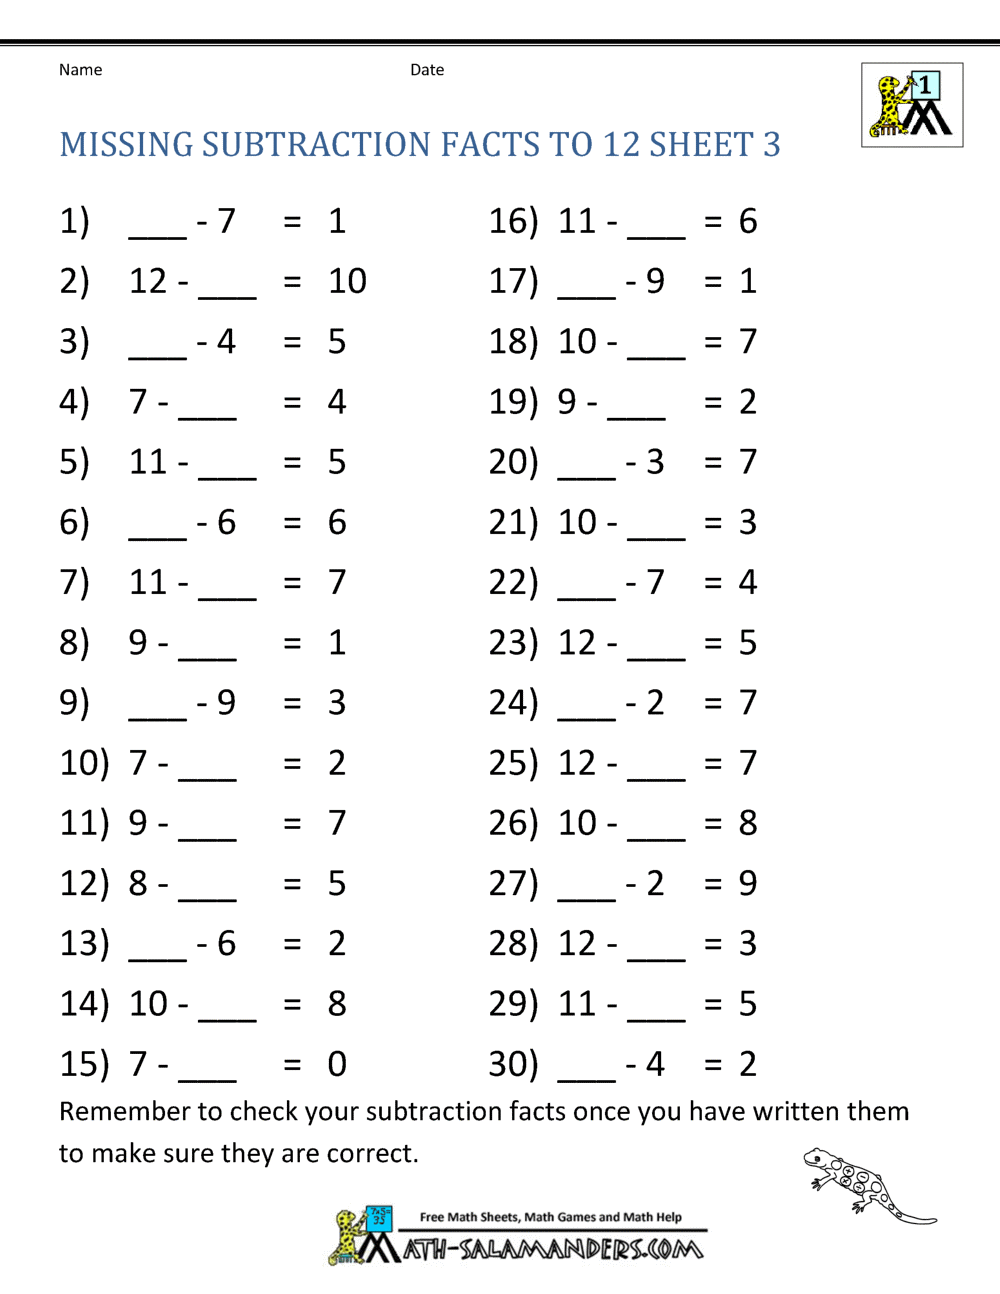 Subtraction Missing Subtraction 3  grade Facts Facts Missing  3  missing 12 worksheets Sheet to number to